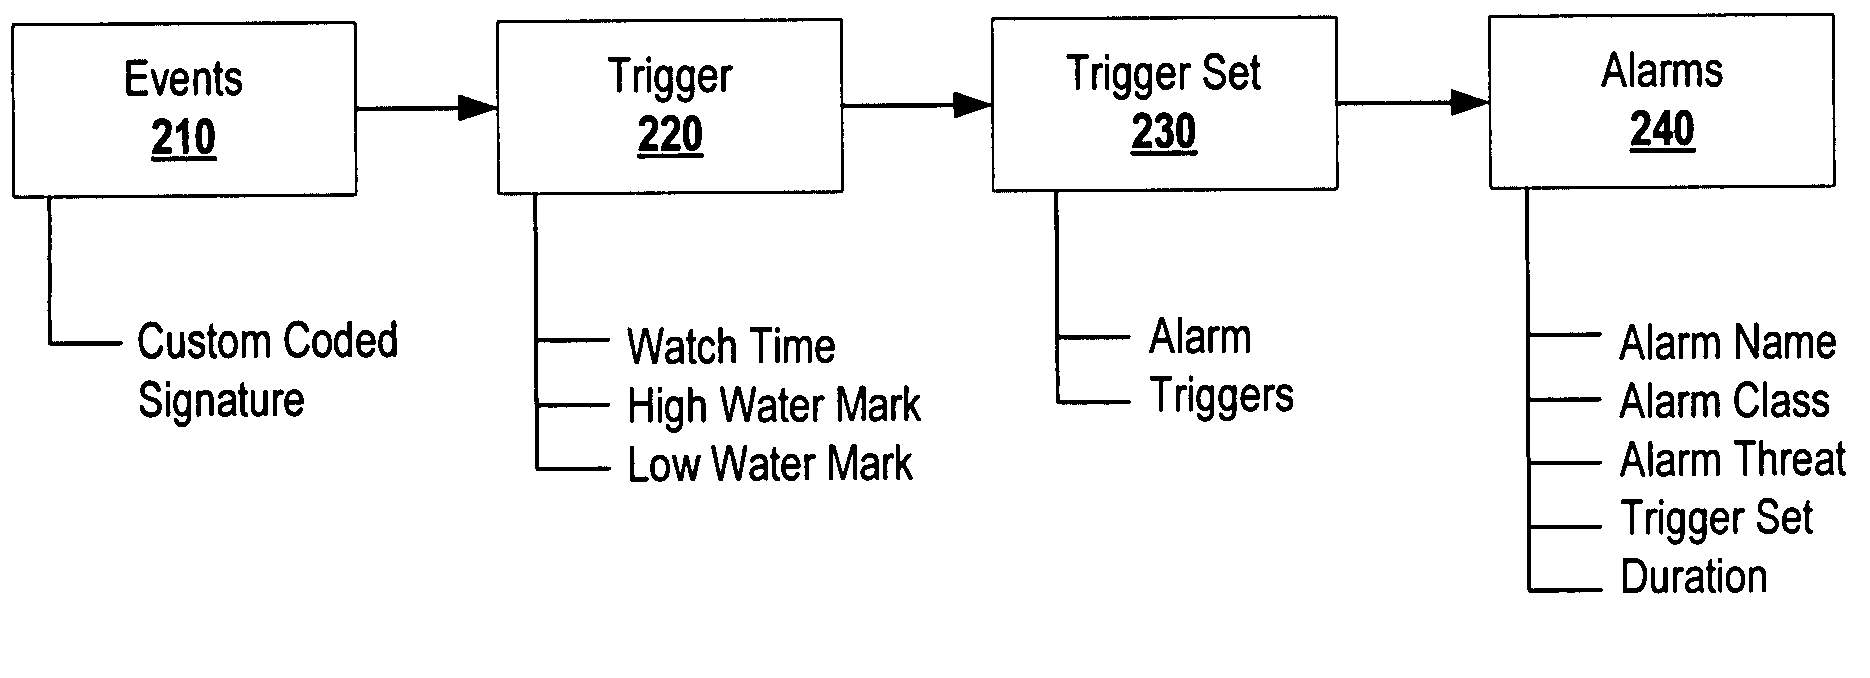 Systems and methods for generating, managing, and displaying alarms for wireless network monitoring